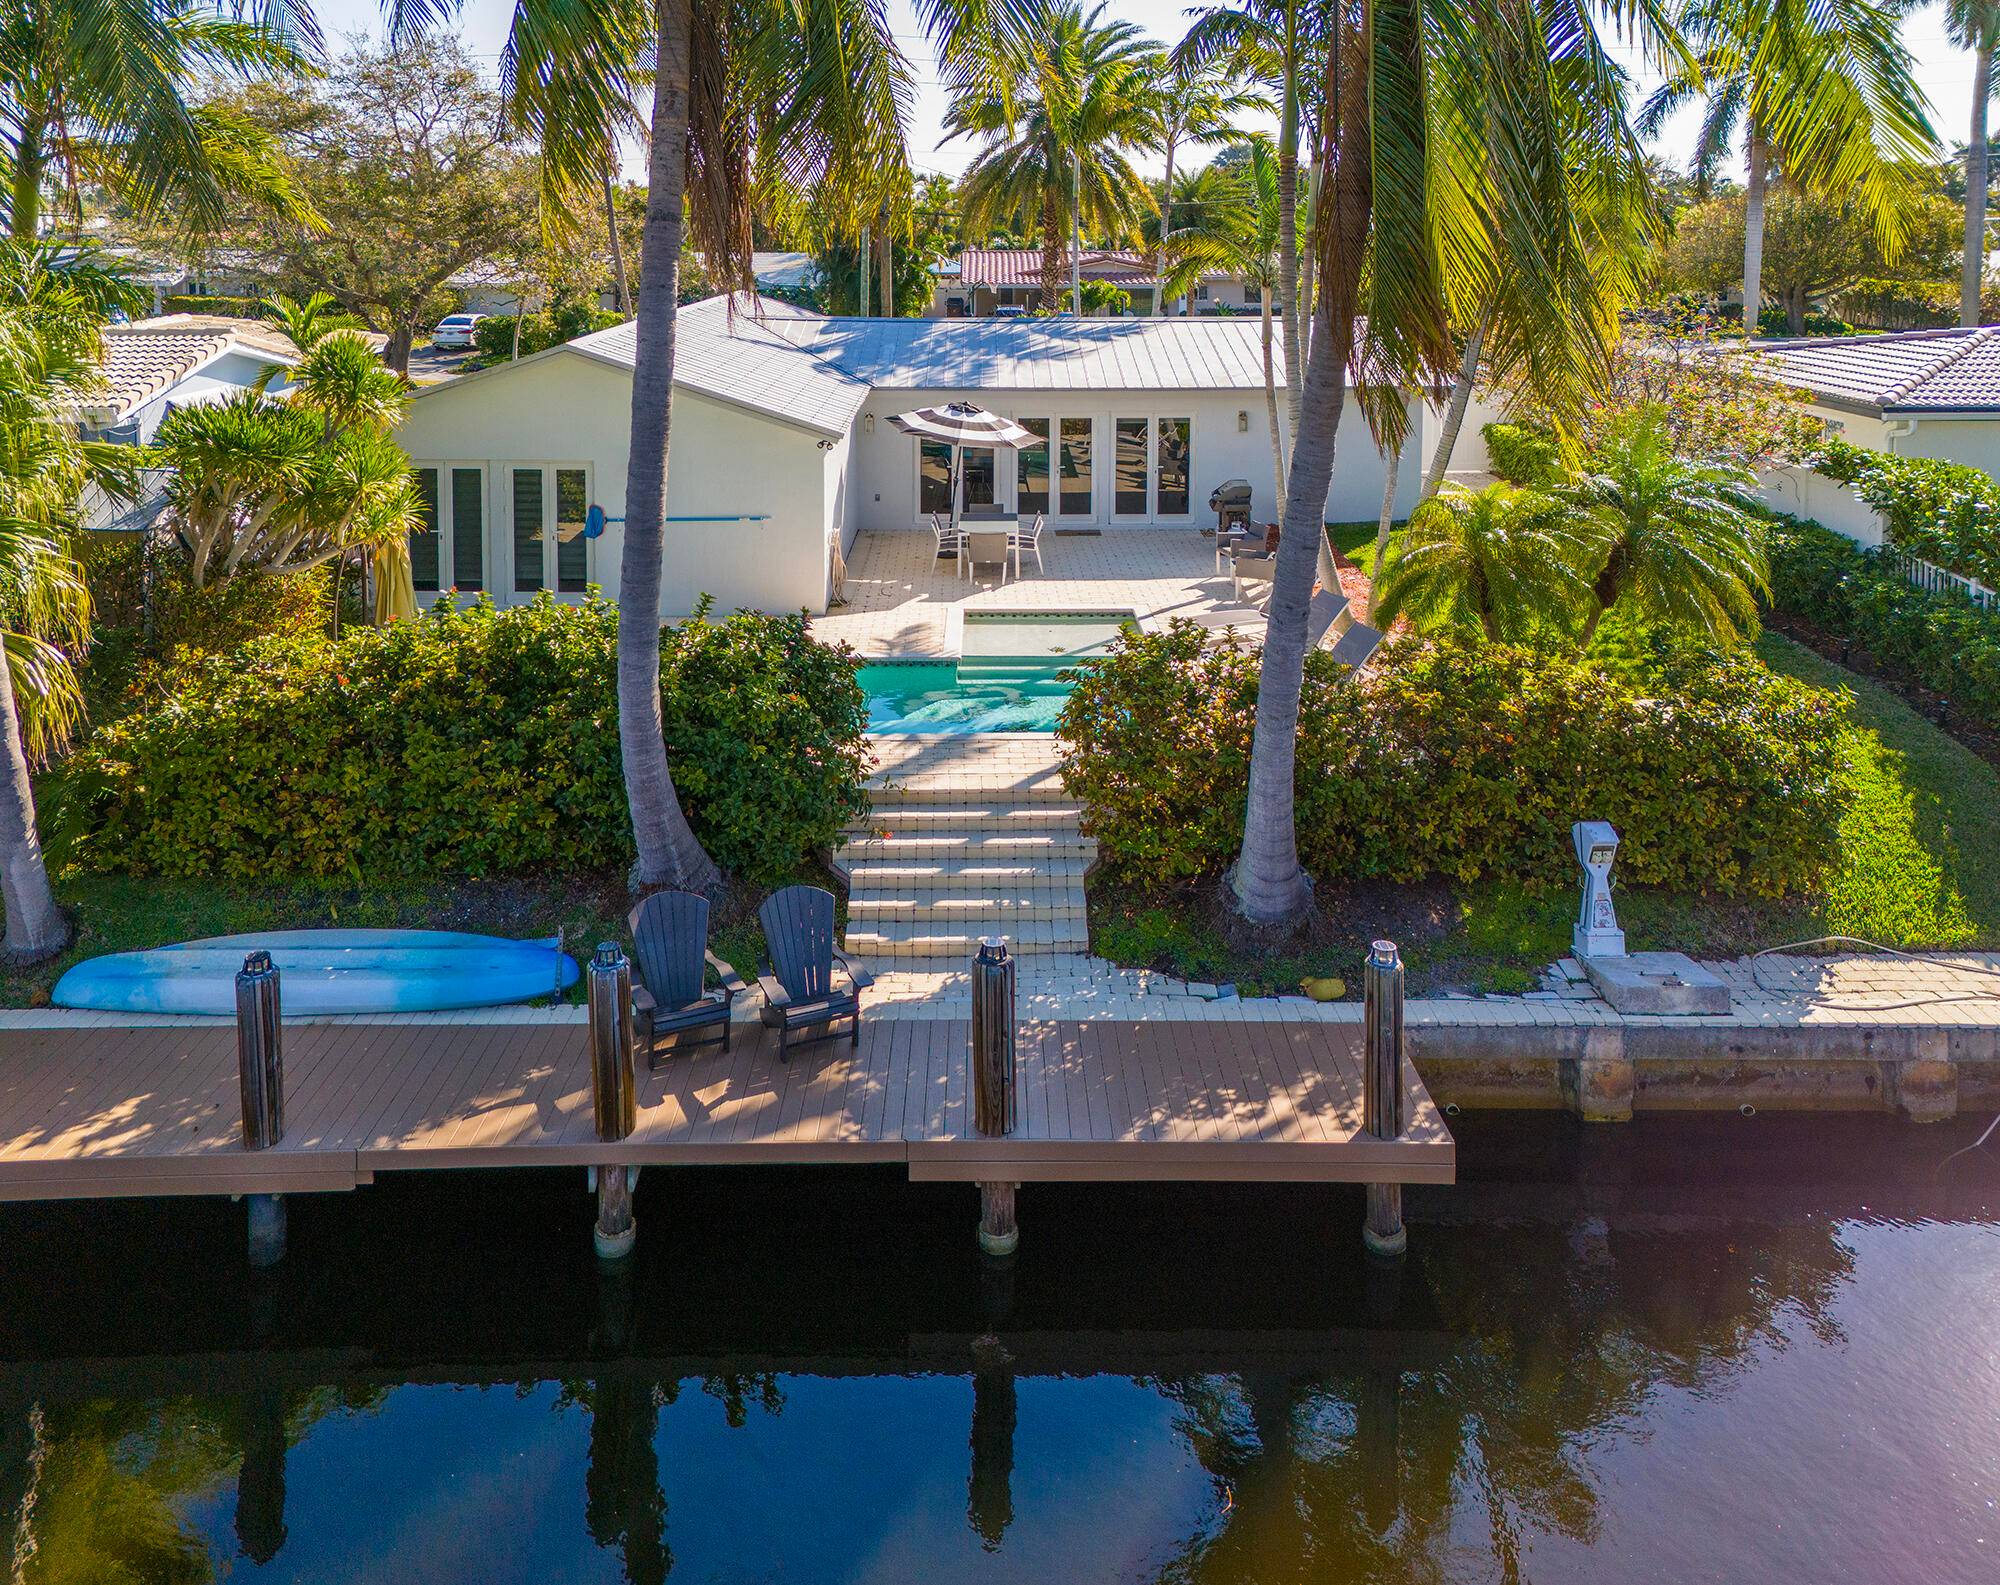 Nestled along the serene waters of Deerfield Beach, Florida, this 3 bedroom, 3 bathroom retreat epitomizes coastal luxury and relaxation.